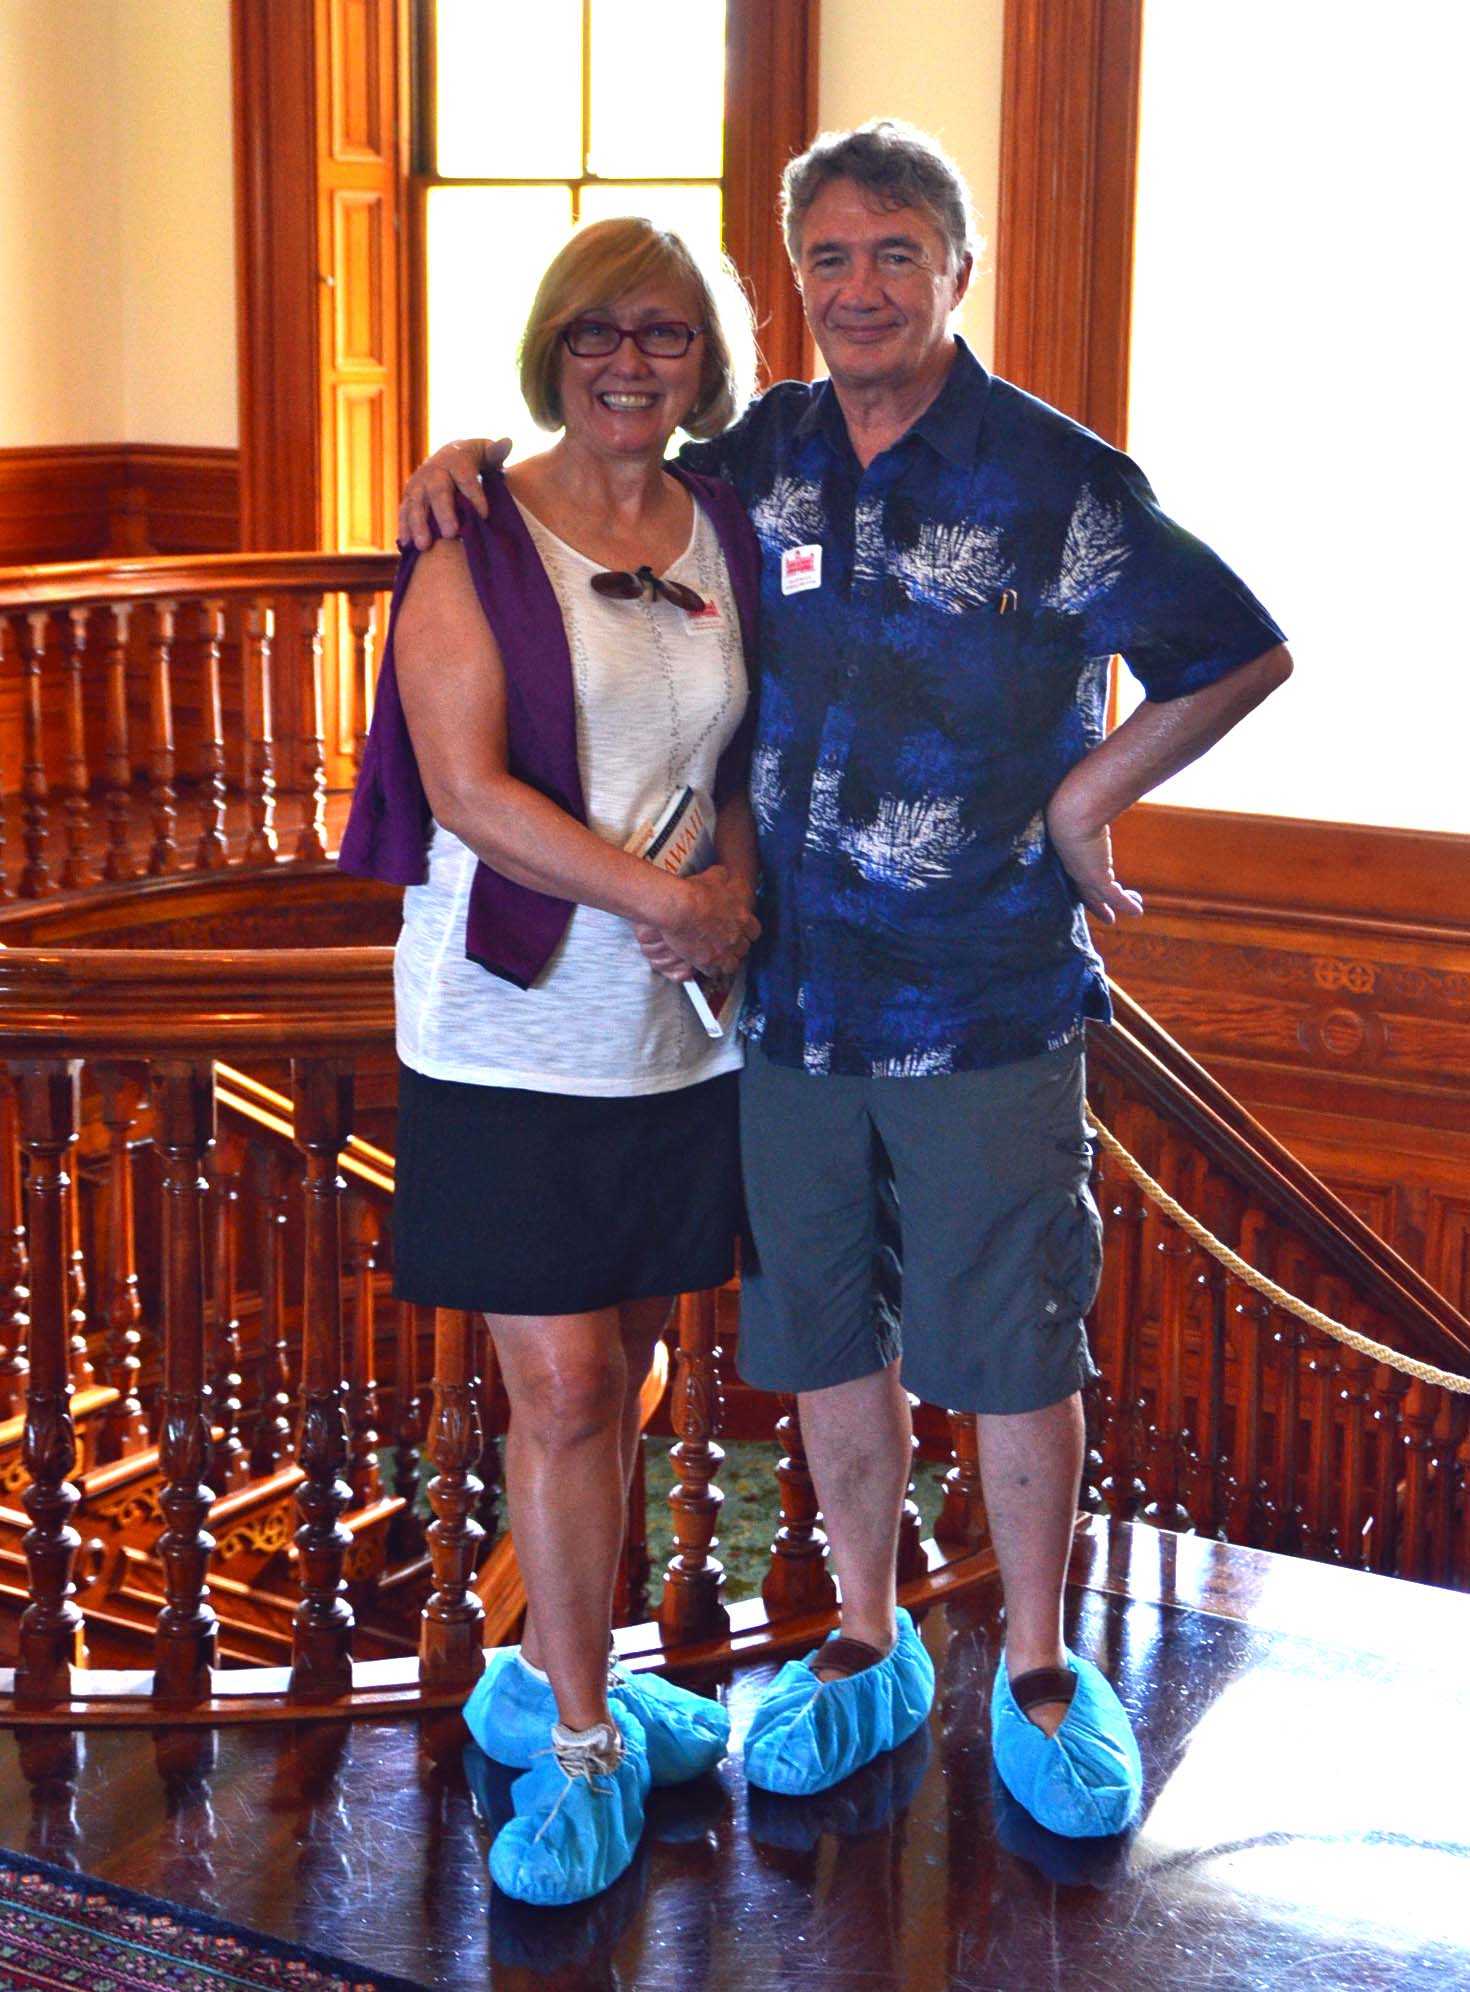 In the Iolani Palace